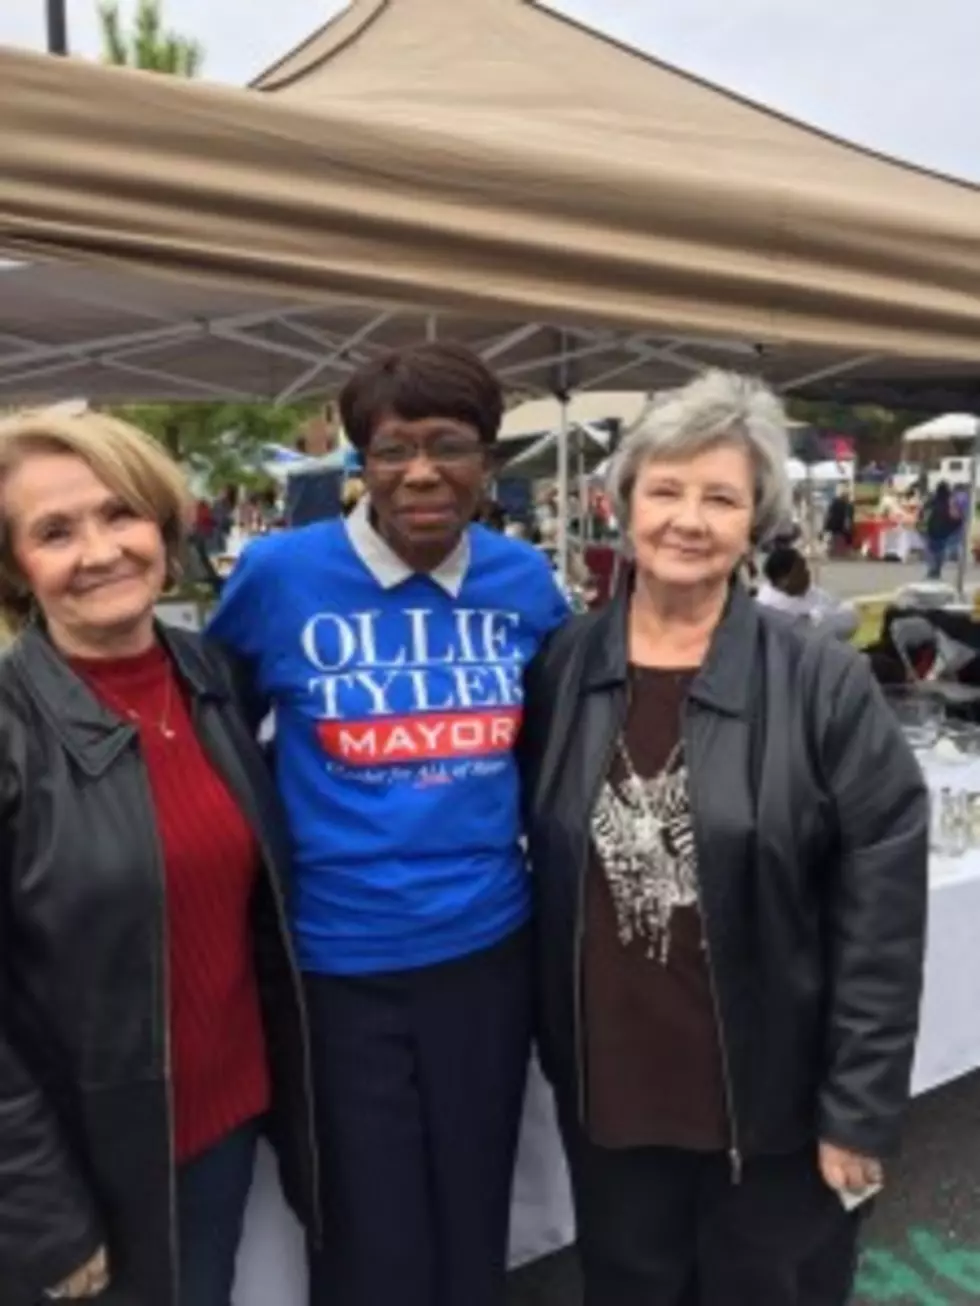 Mayor-Elect Ollie Tyler Invites Local Residents to Her Inauguration on Saturday December 27 [VIDEO]